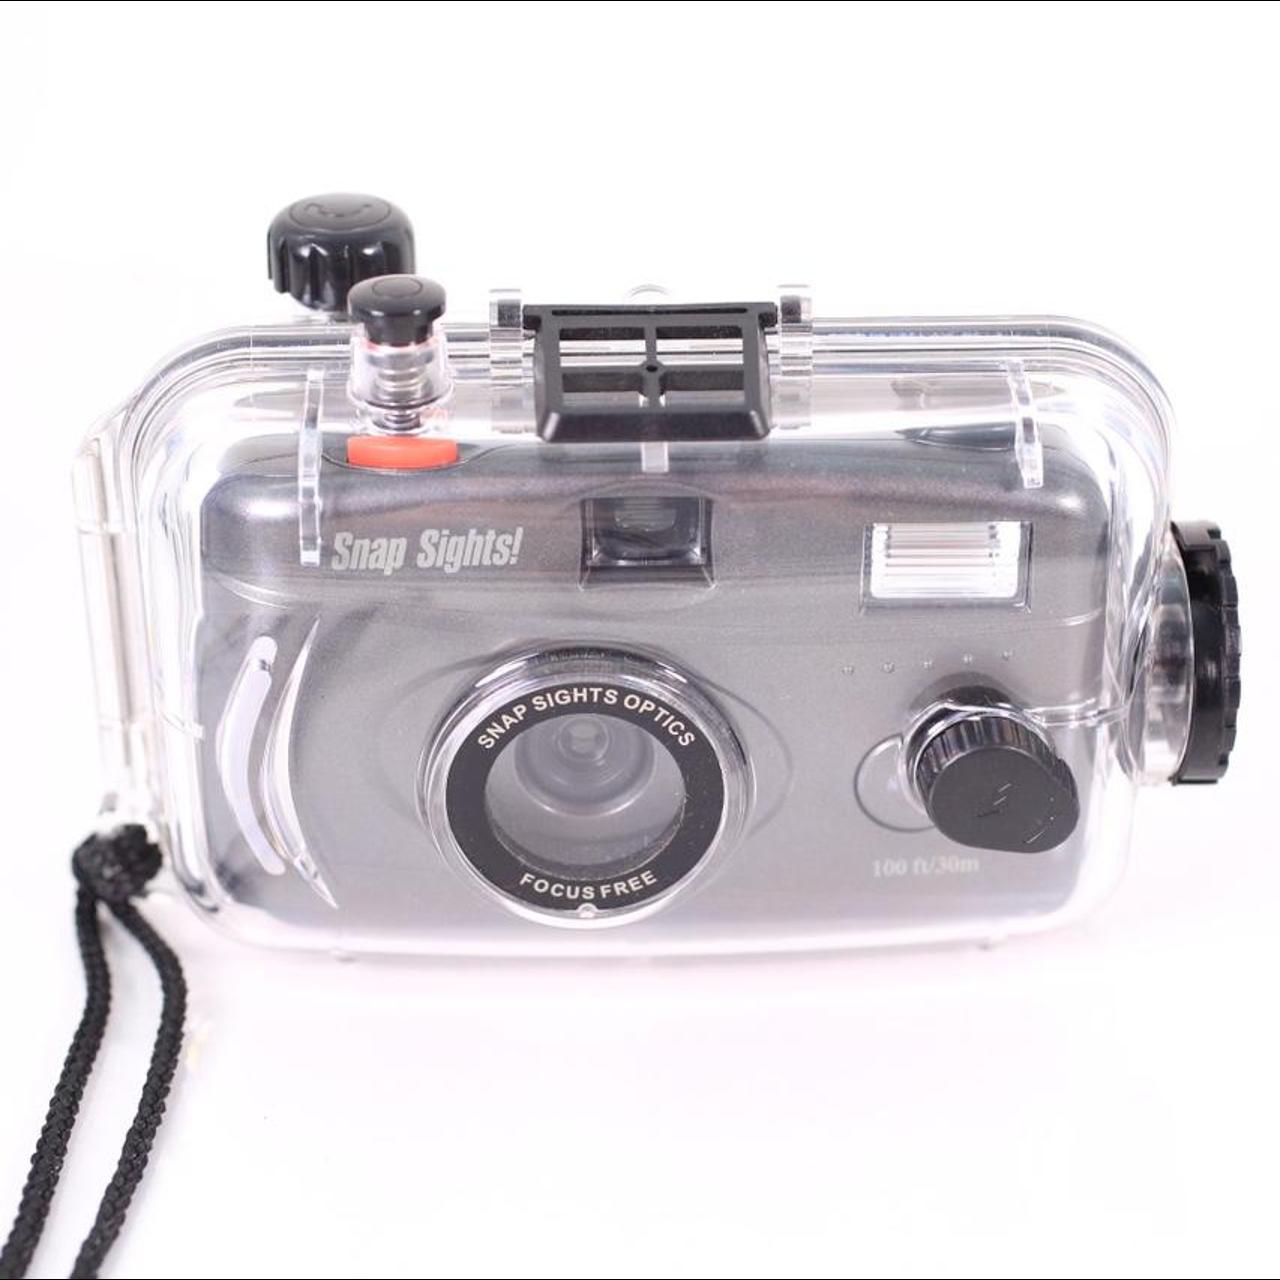 Product Image 1 - Vintage Snap Sights! 35mm underwater